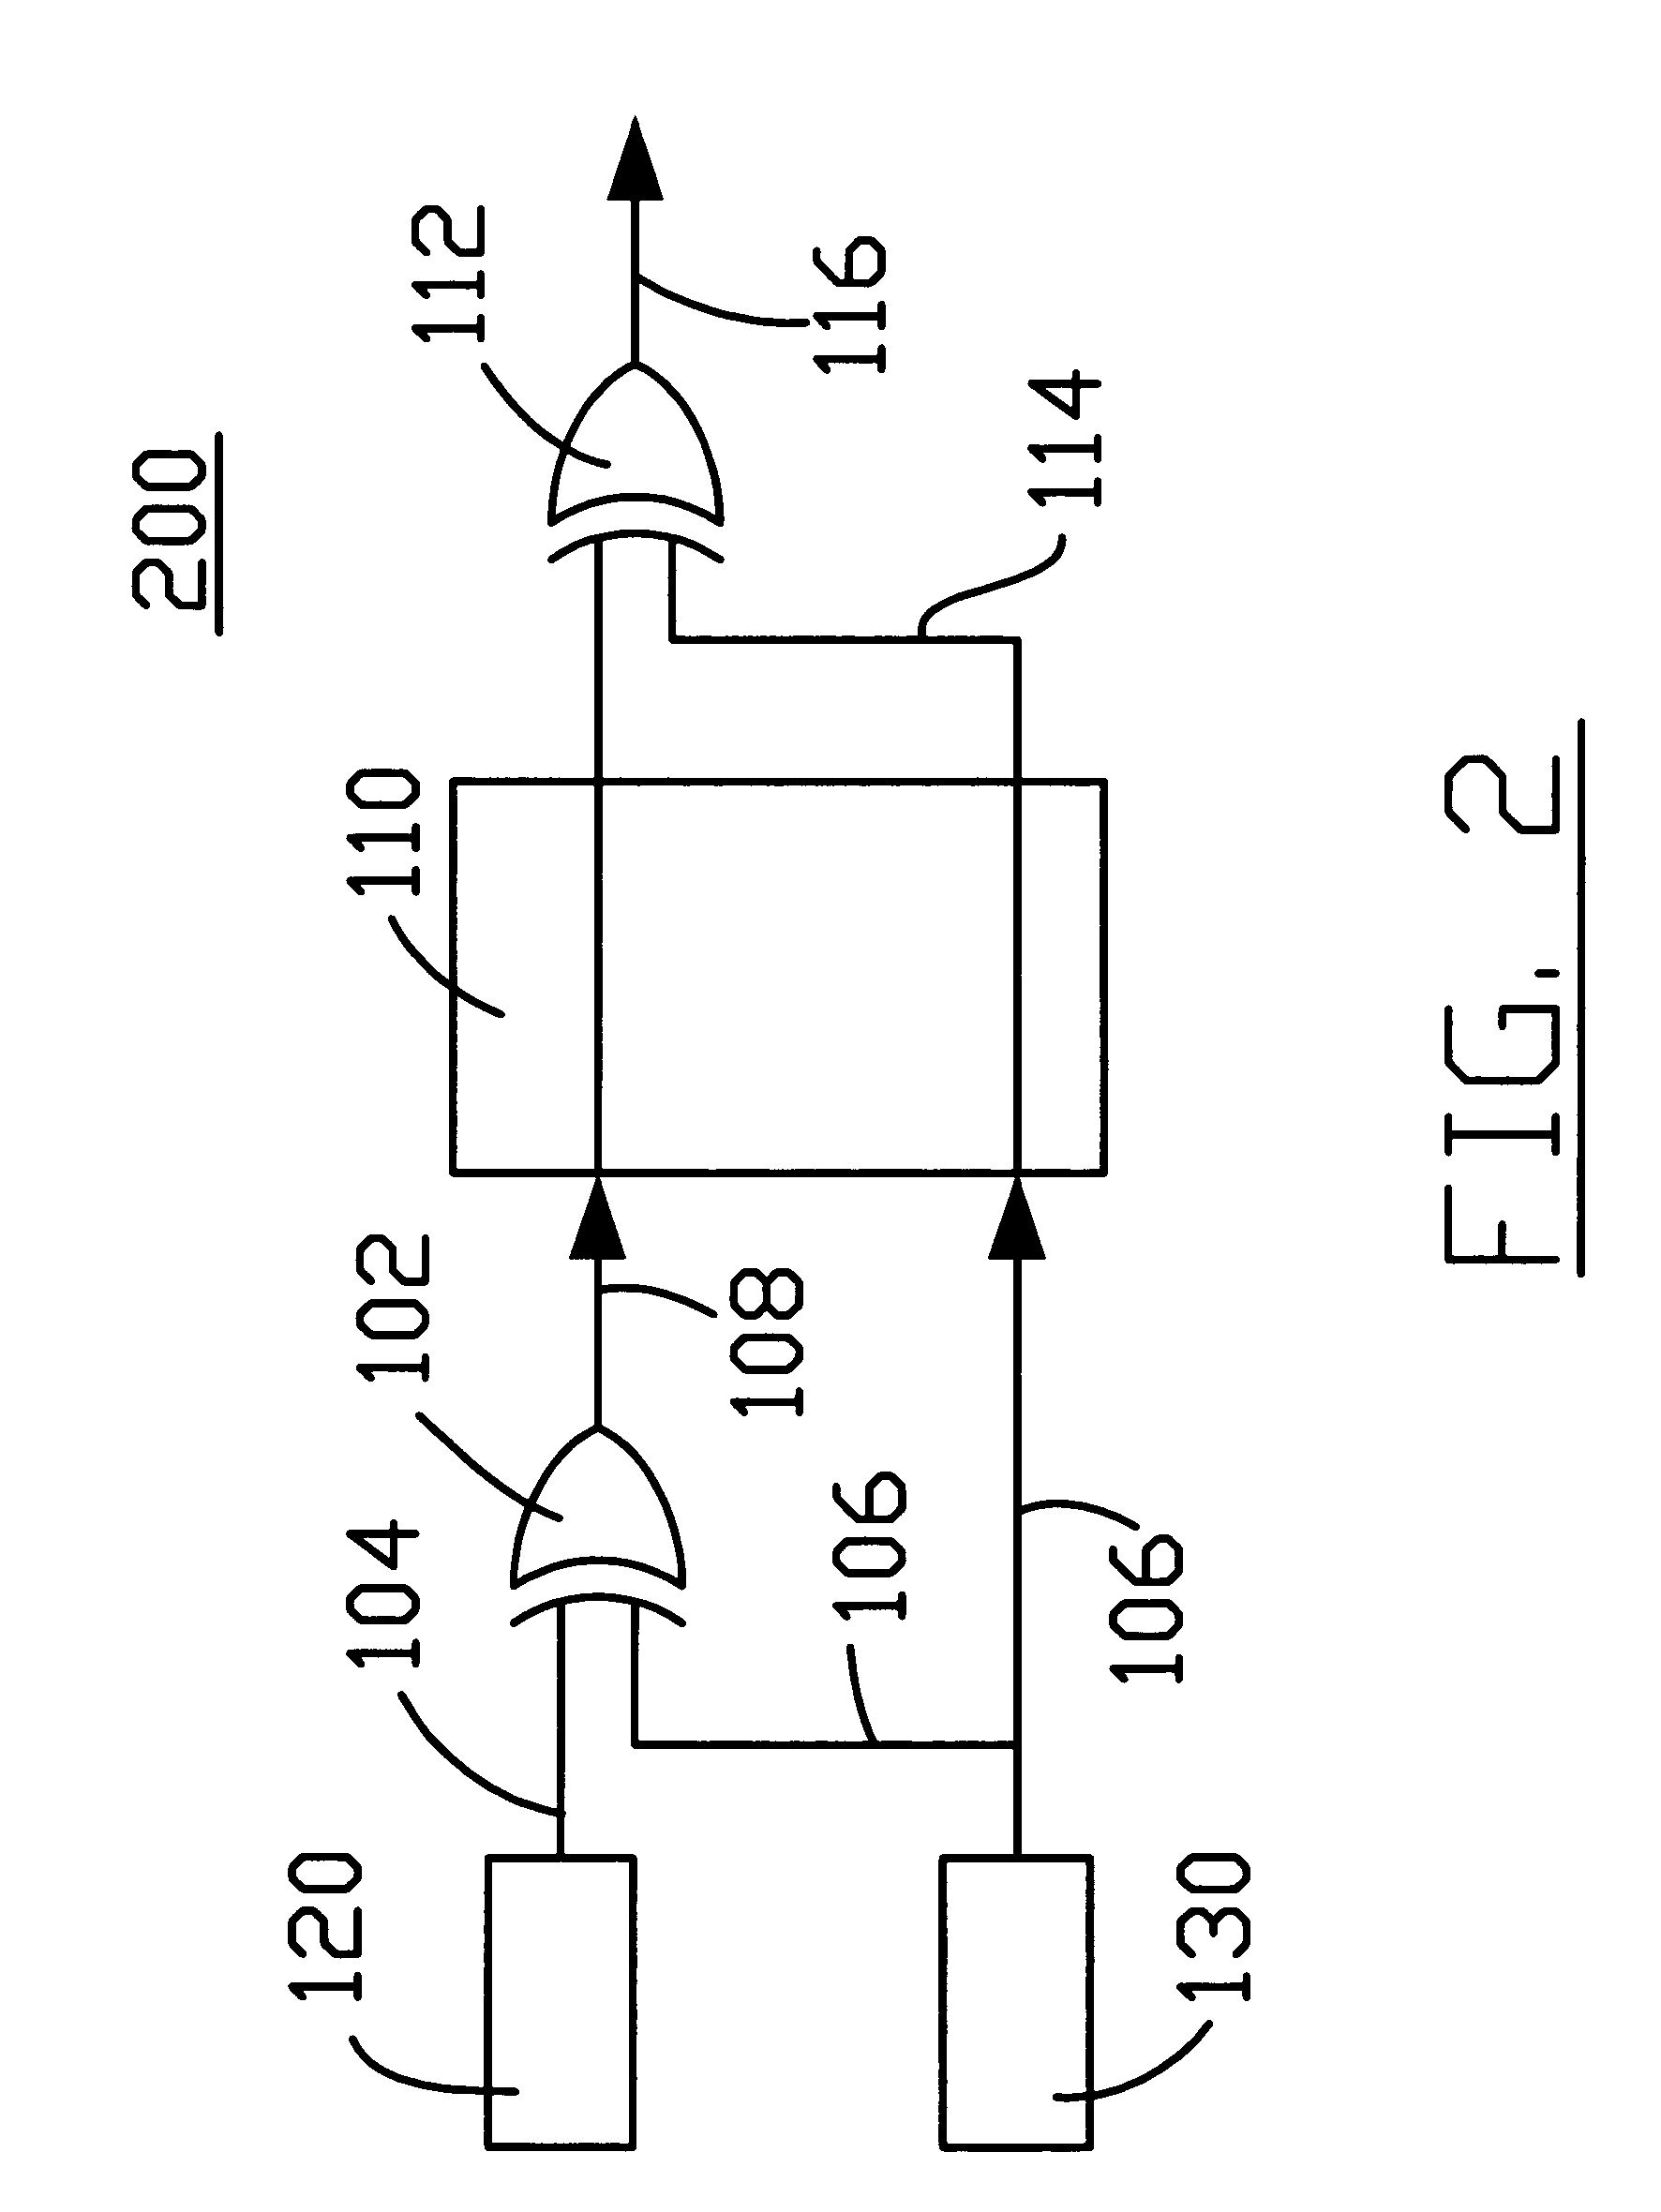 Power consumption stabilization system and method